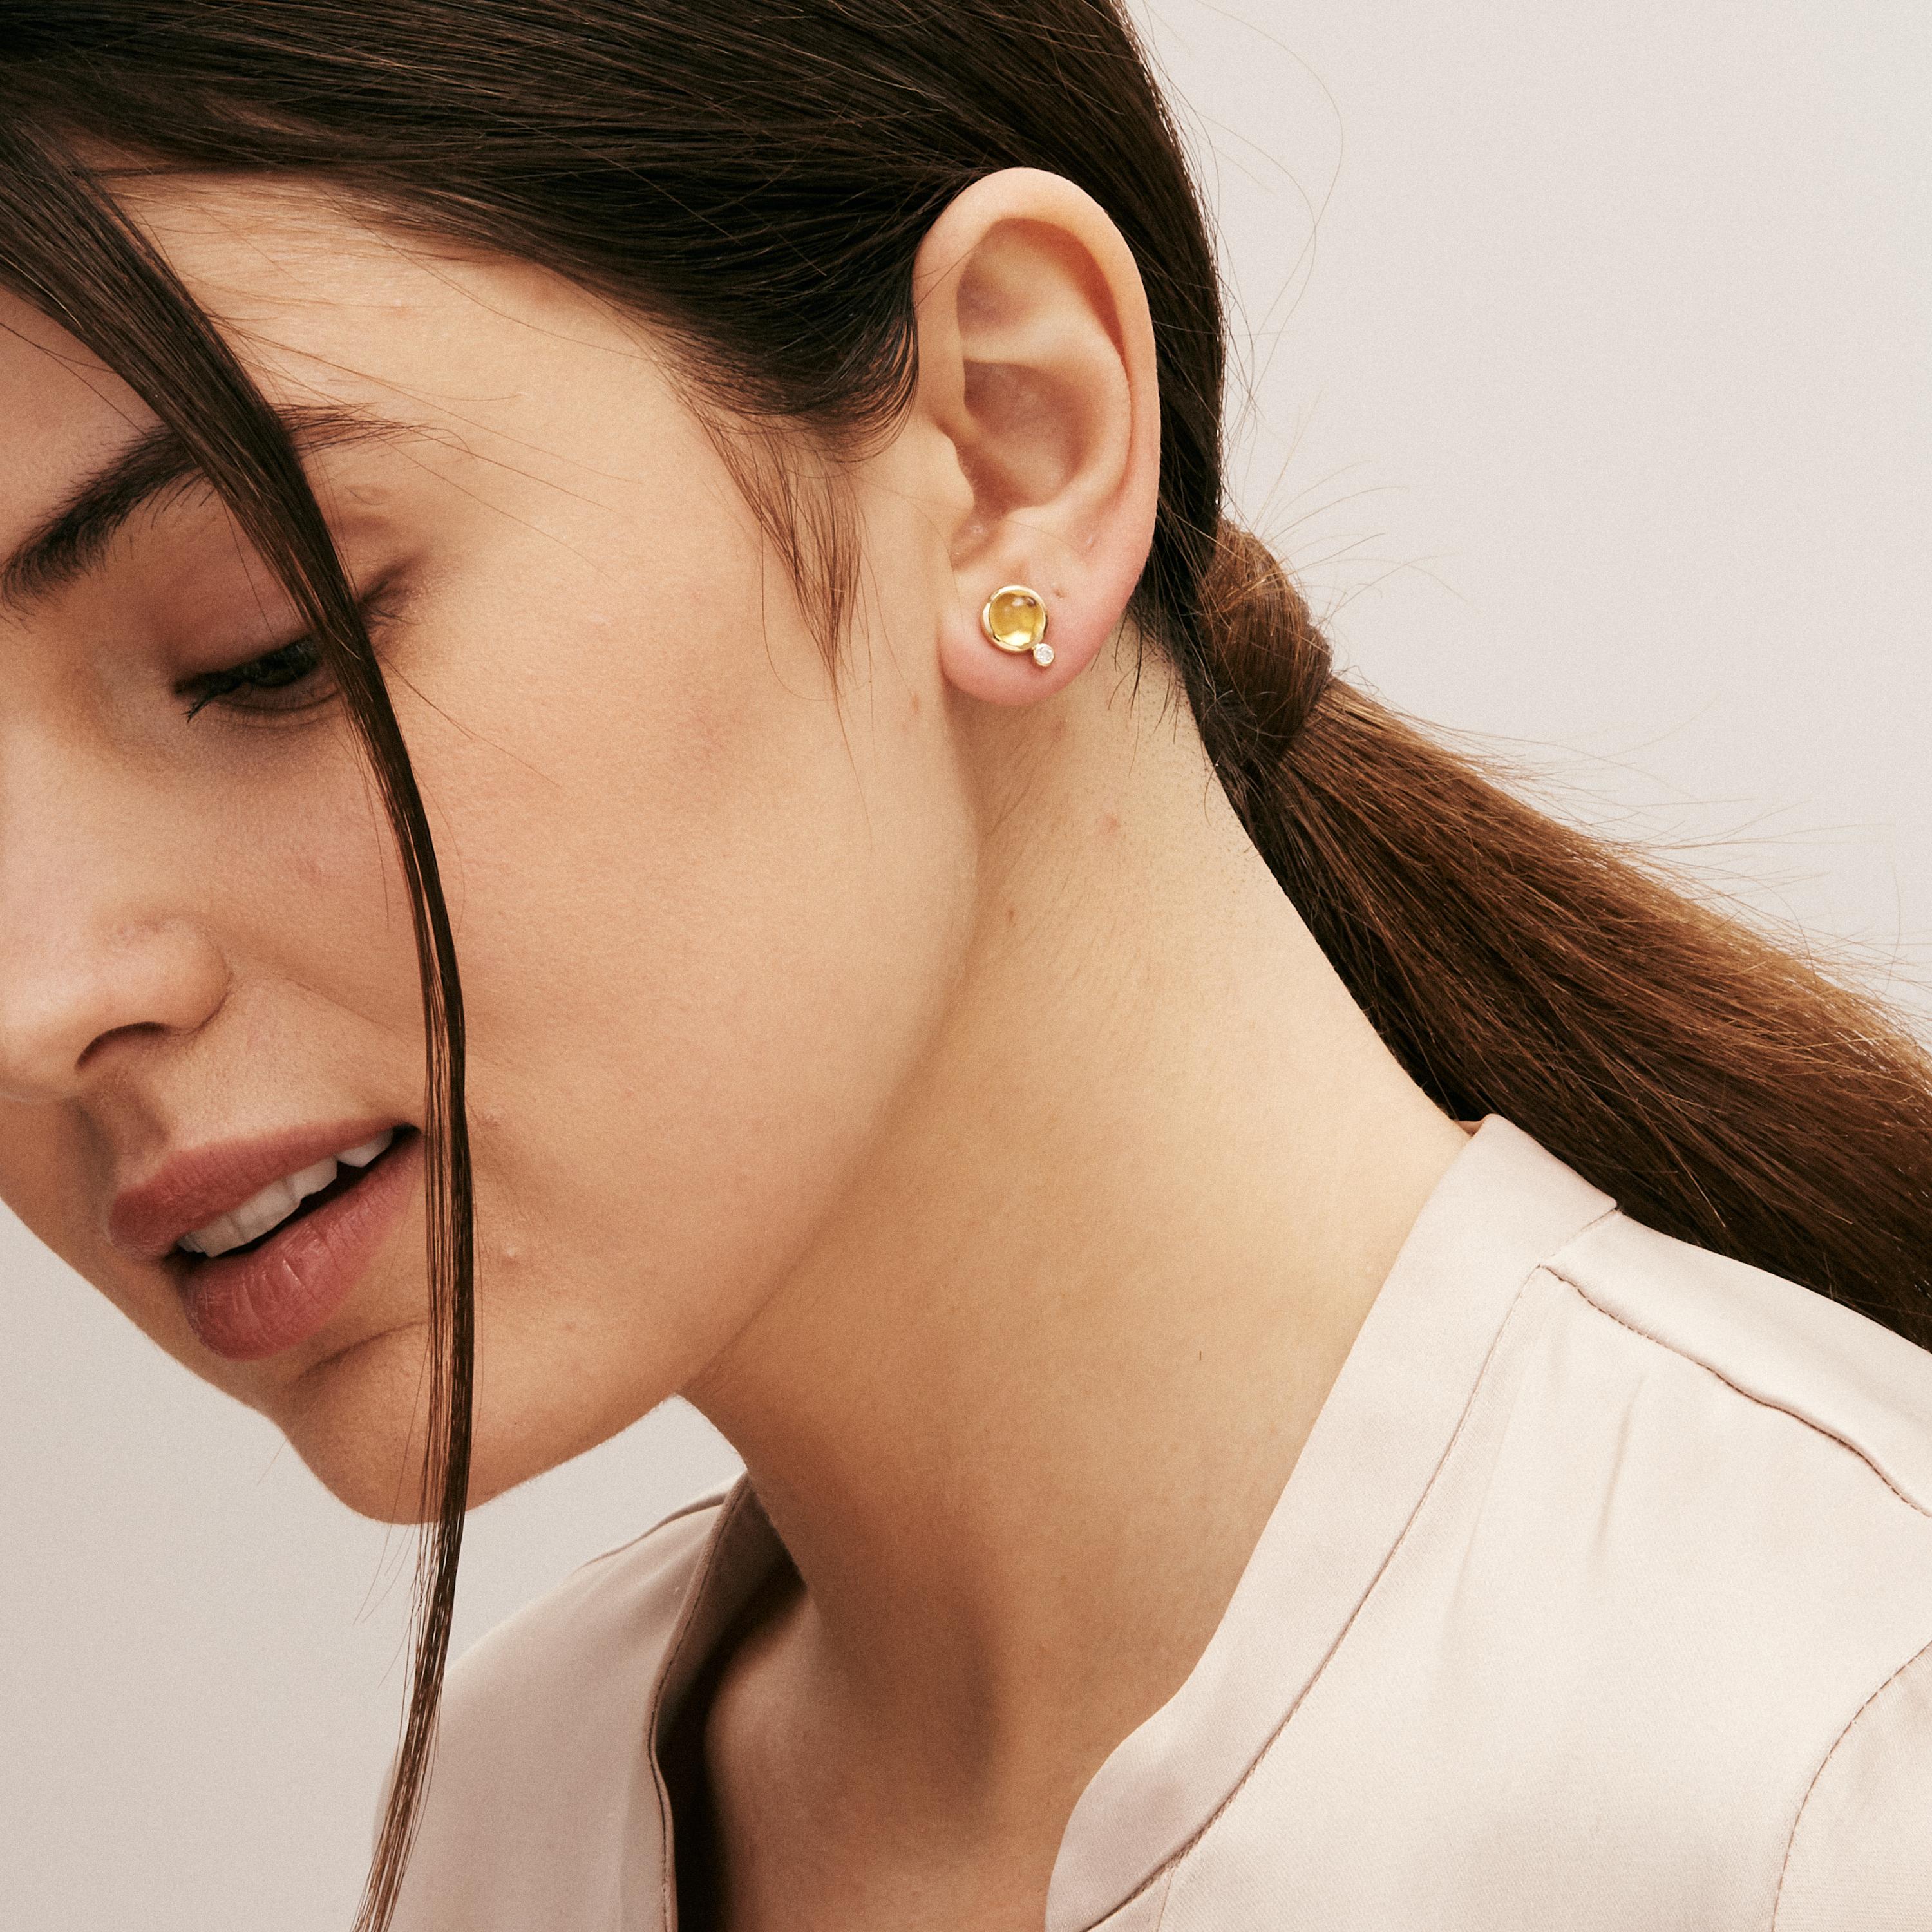 Created in 18 karat yellow gold
Citrine 2.50 carats approx.
Diamonds 0.05 carat approx.
Post backs for pierced ears
Limited edition

Luxuriate in the opulent beauty of these limited edition 18 karat yellow gold earrings, the perfect combination of